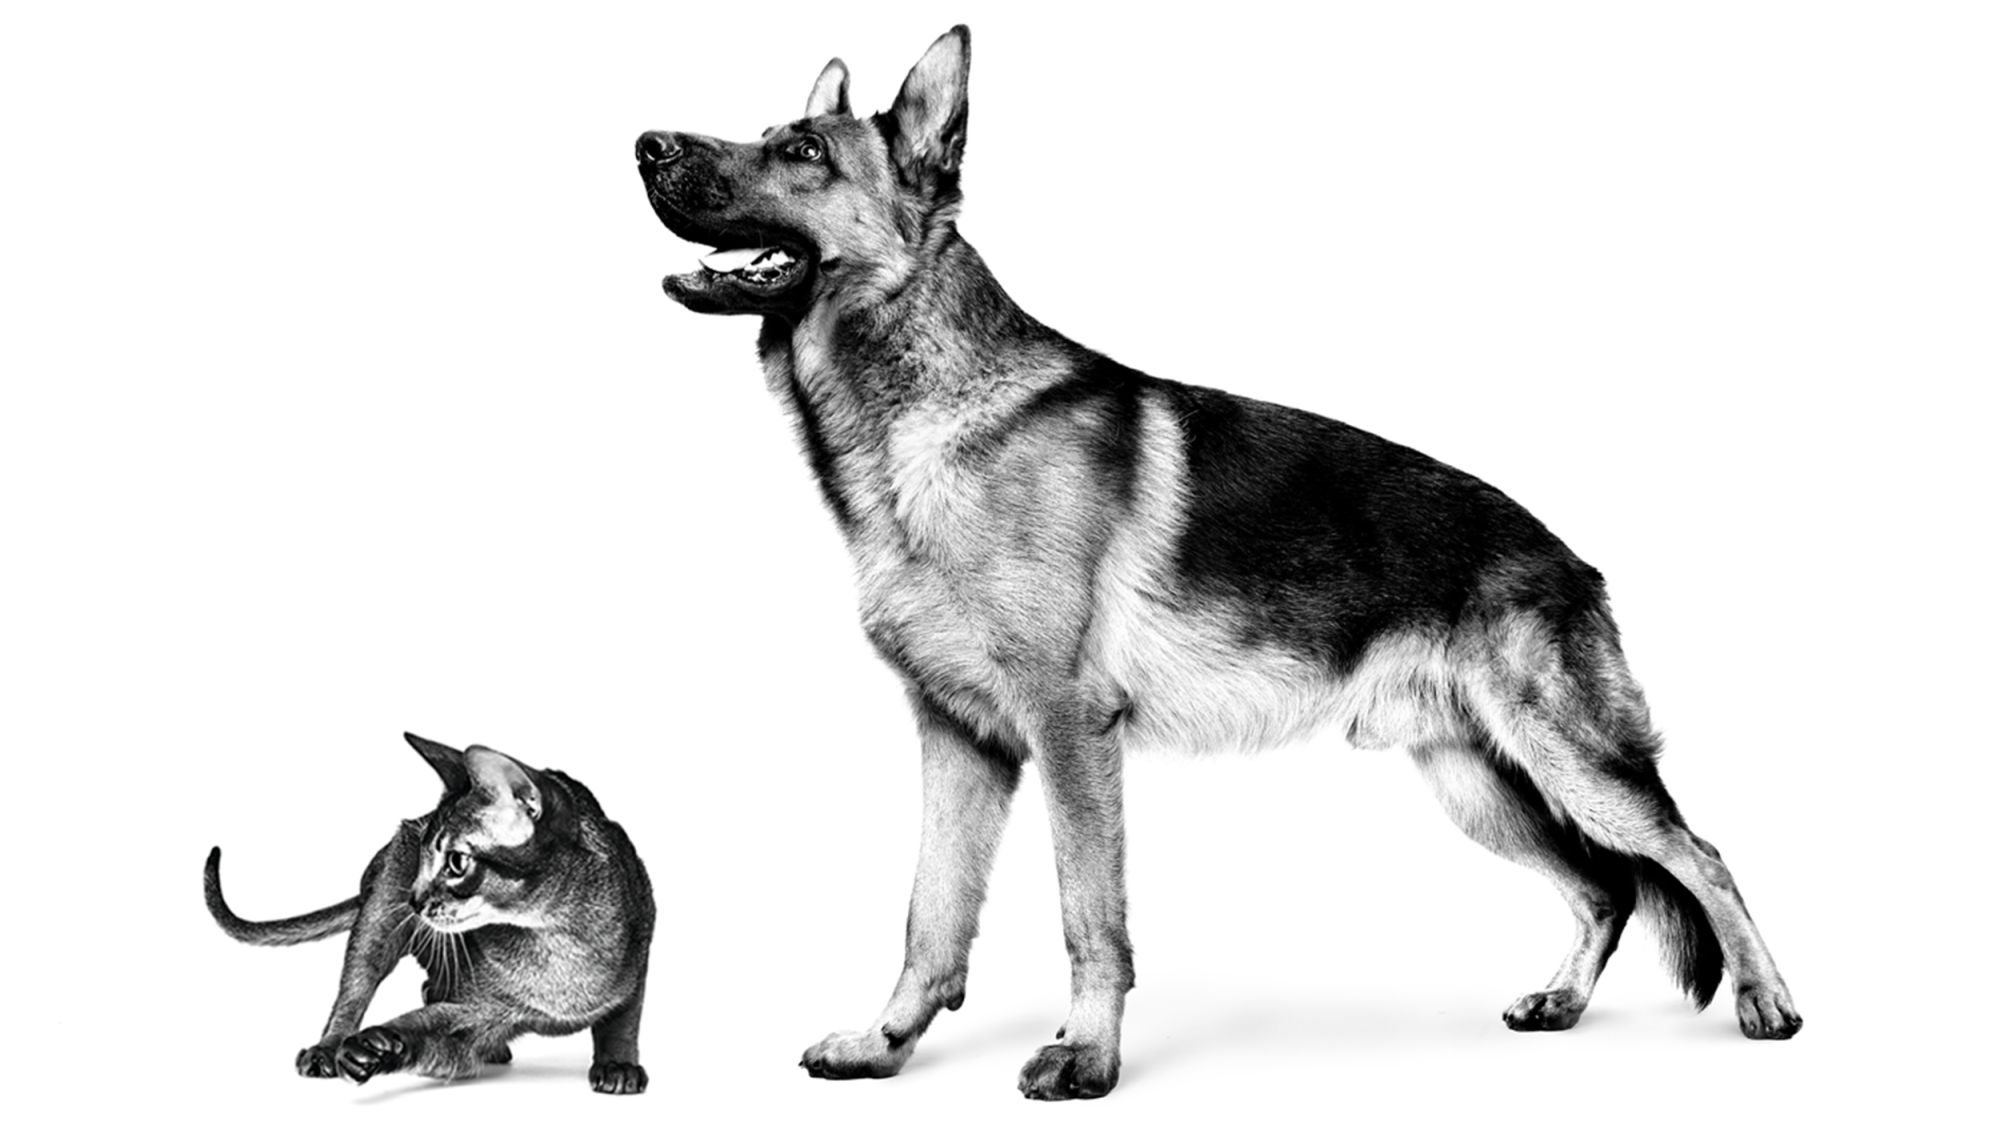 Adult German Shepherd and Abyssinian cat standing in black and white on a white